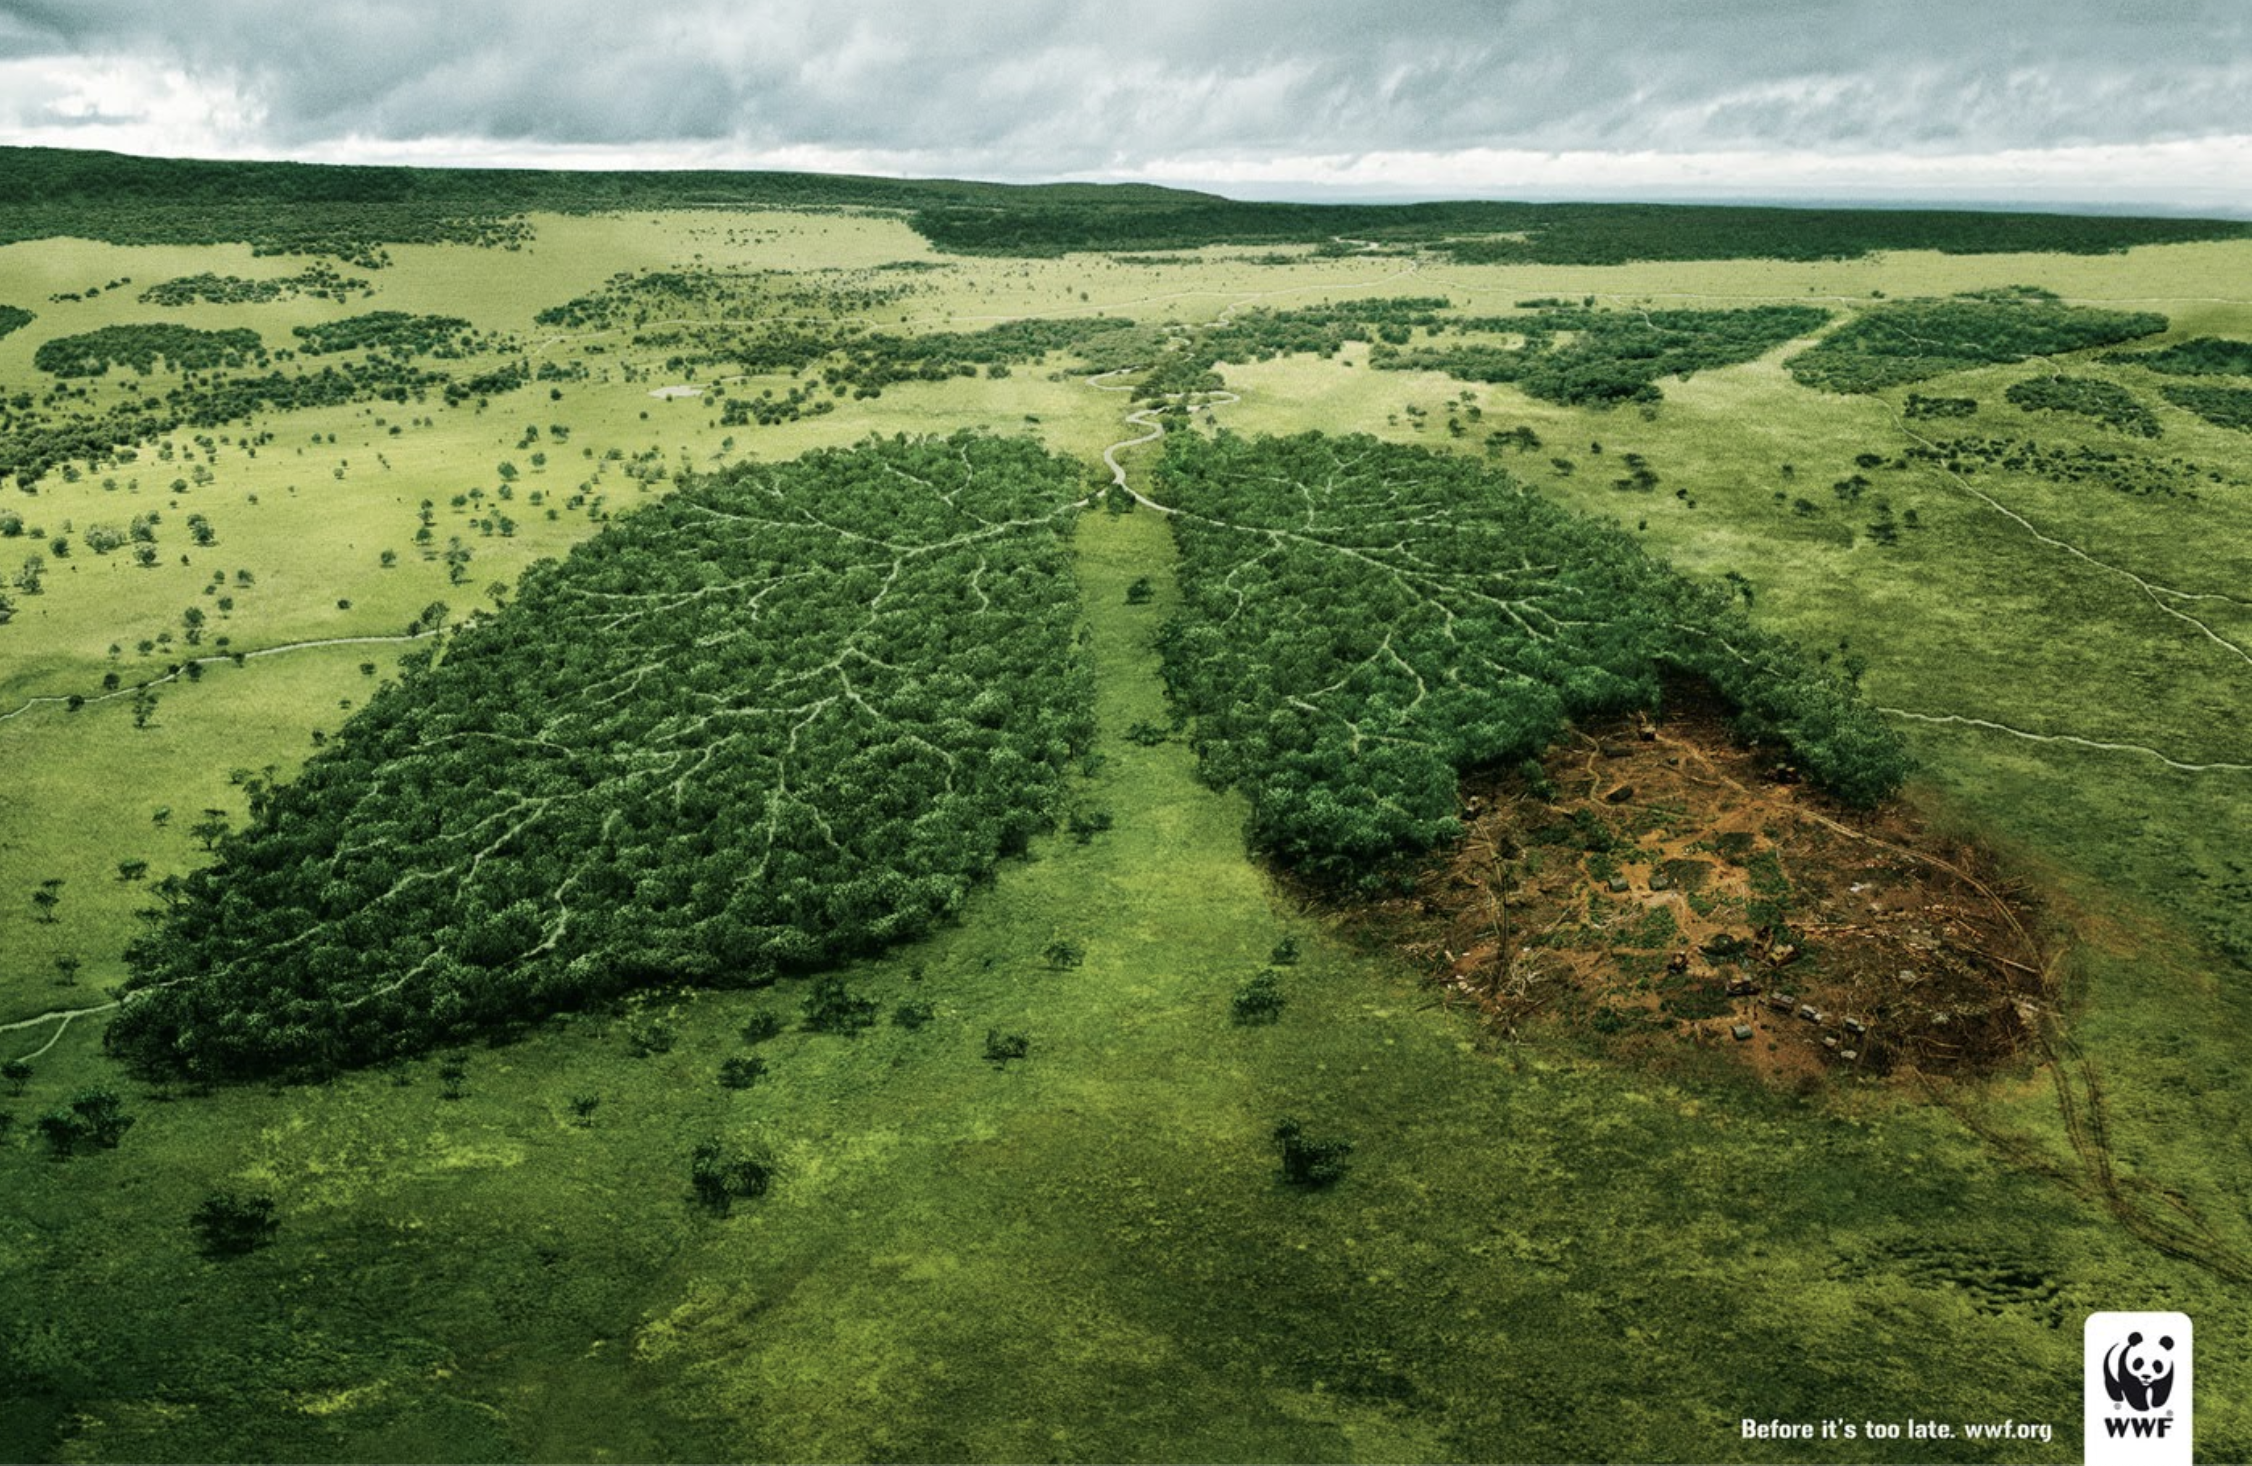 This image represents visual rhetoric because it is demonstrating through the image that by cutting down trees we are killing our source of oxygen.